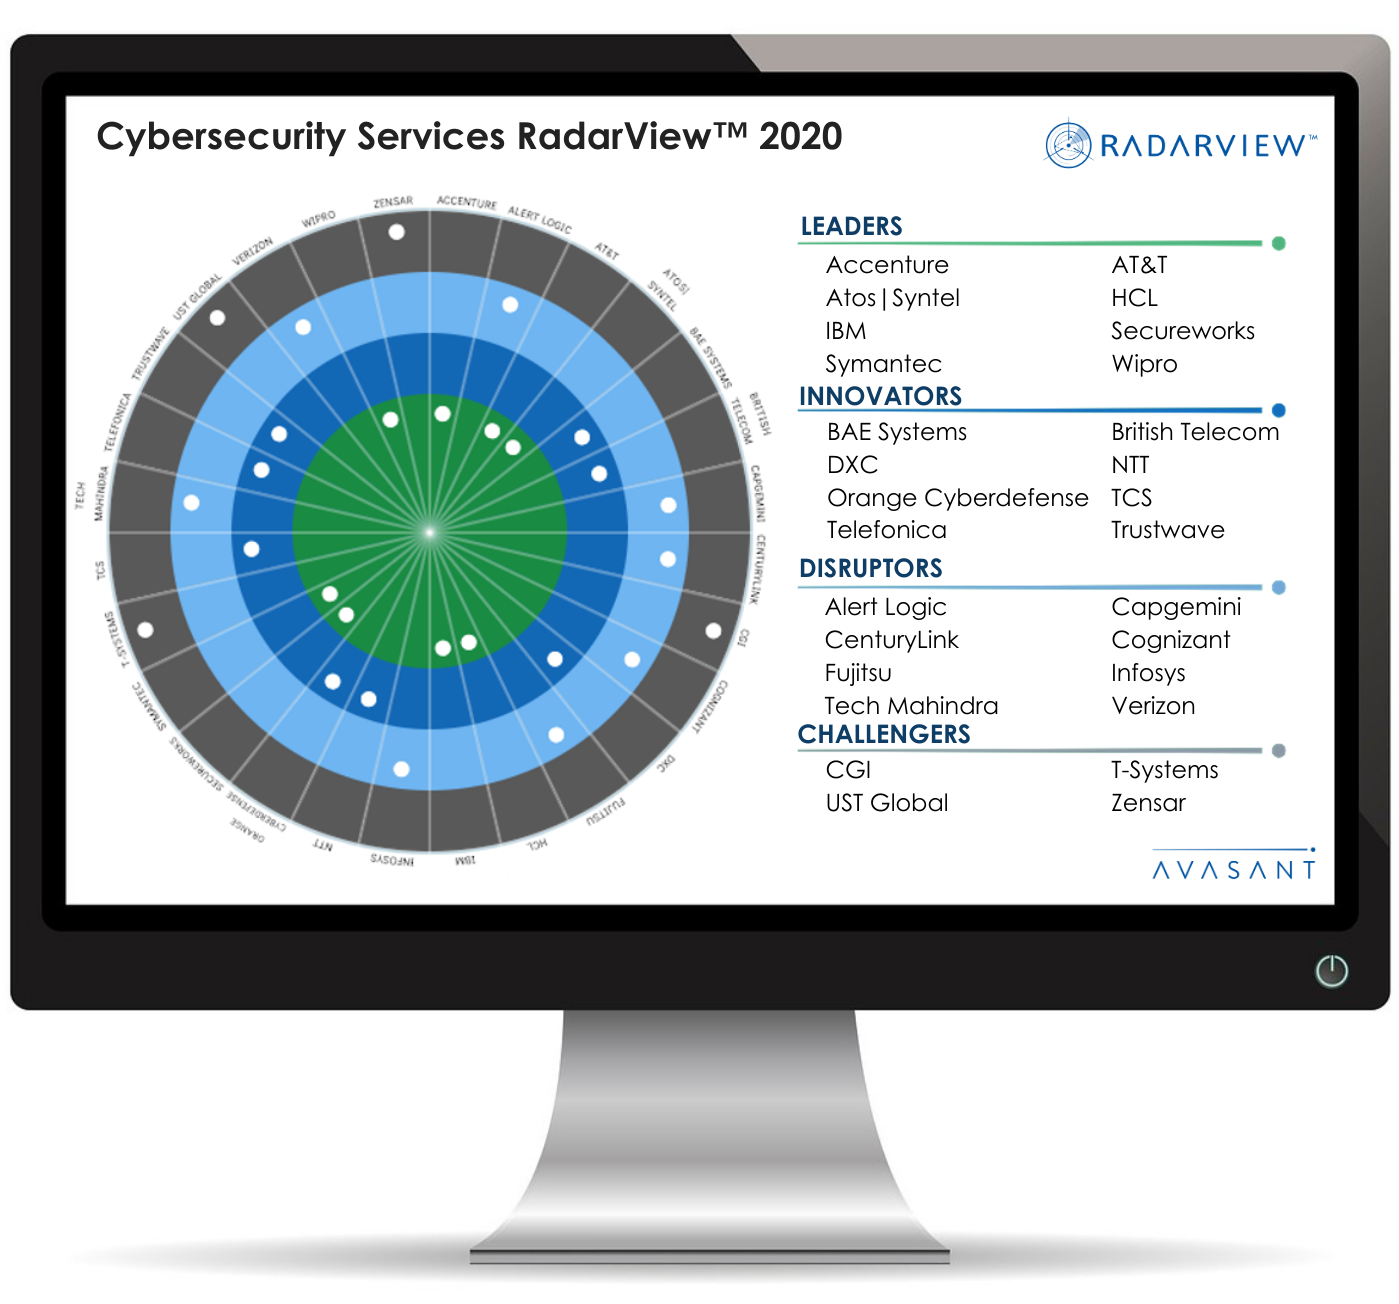 Cybersecurity RV 1 1 - Cybersecurity Services RadarView™ 2020 - Telefonica